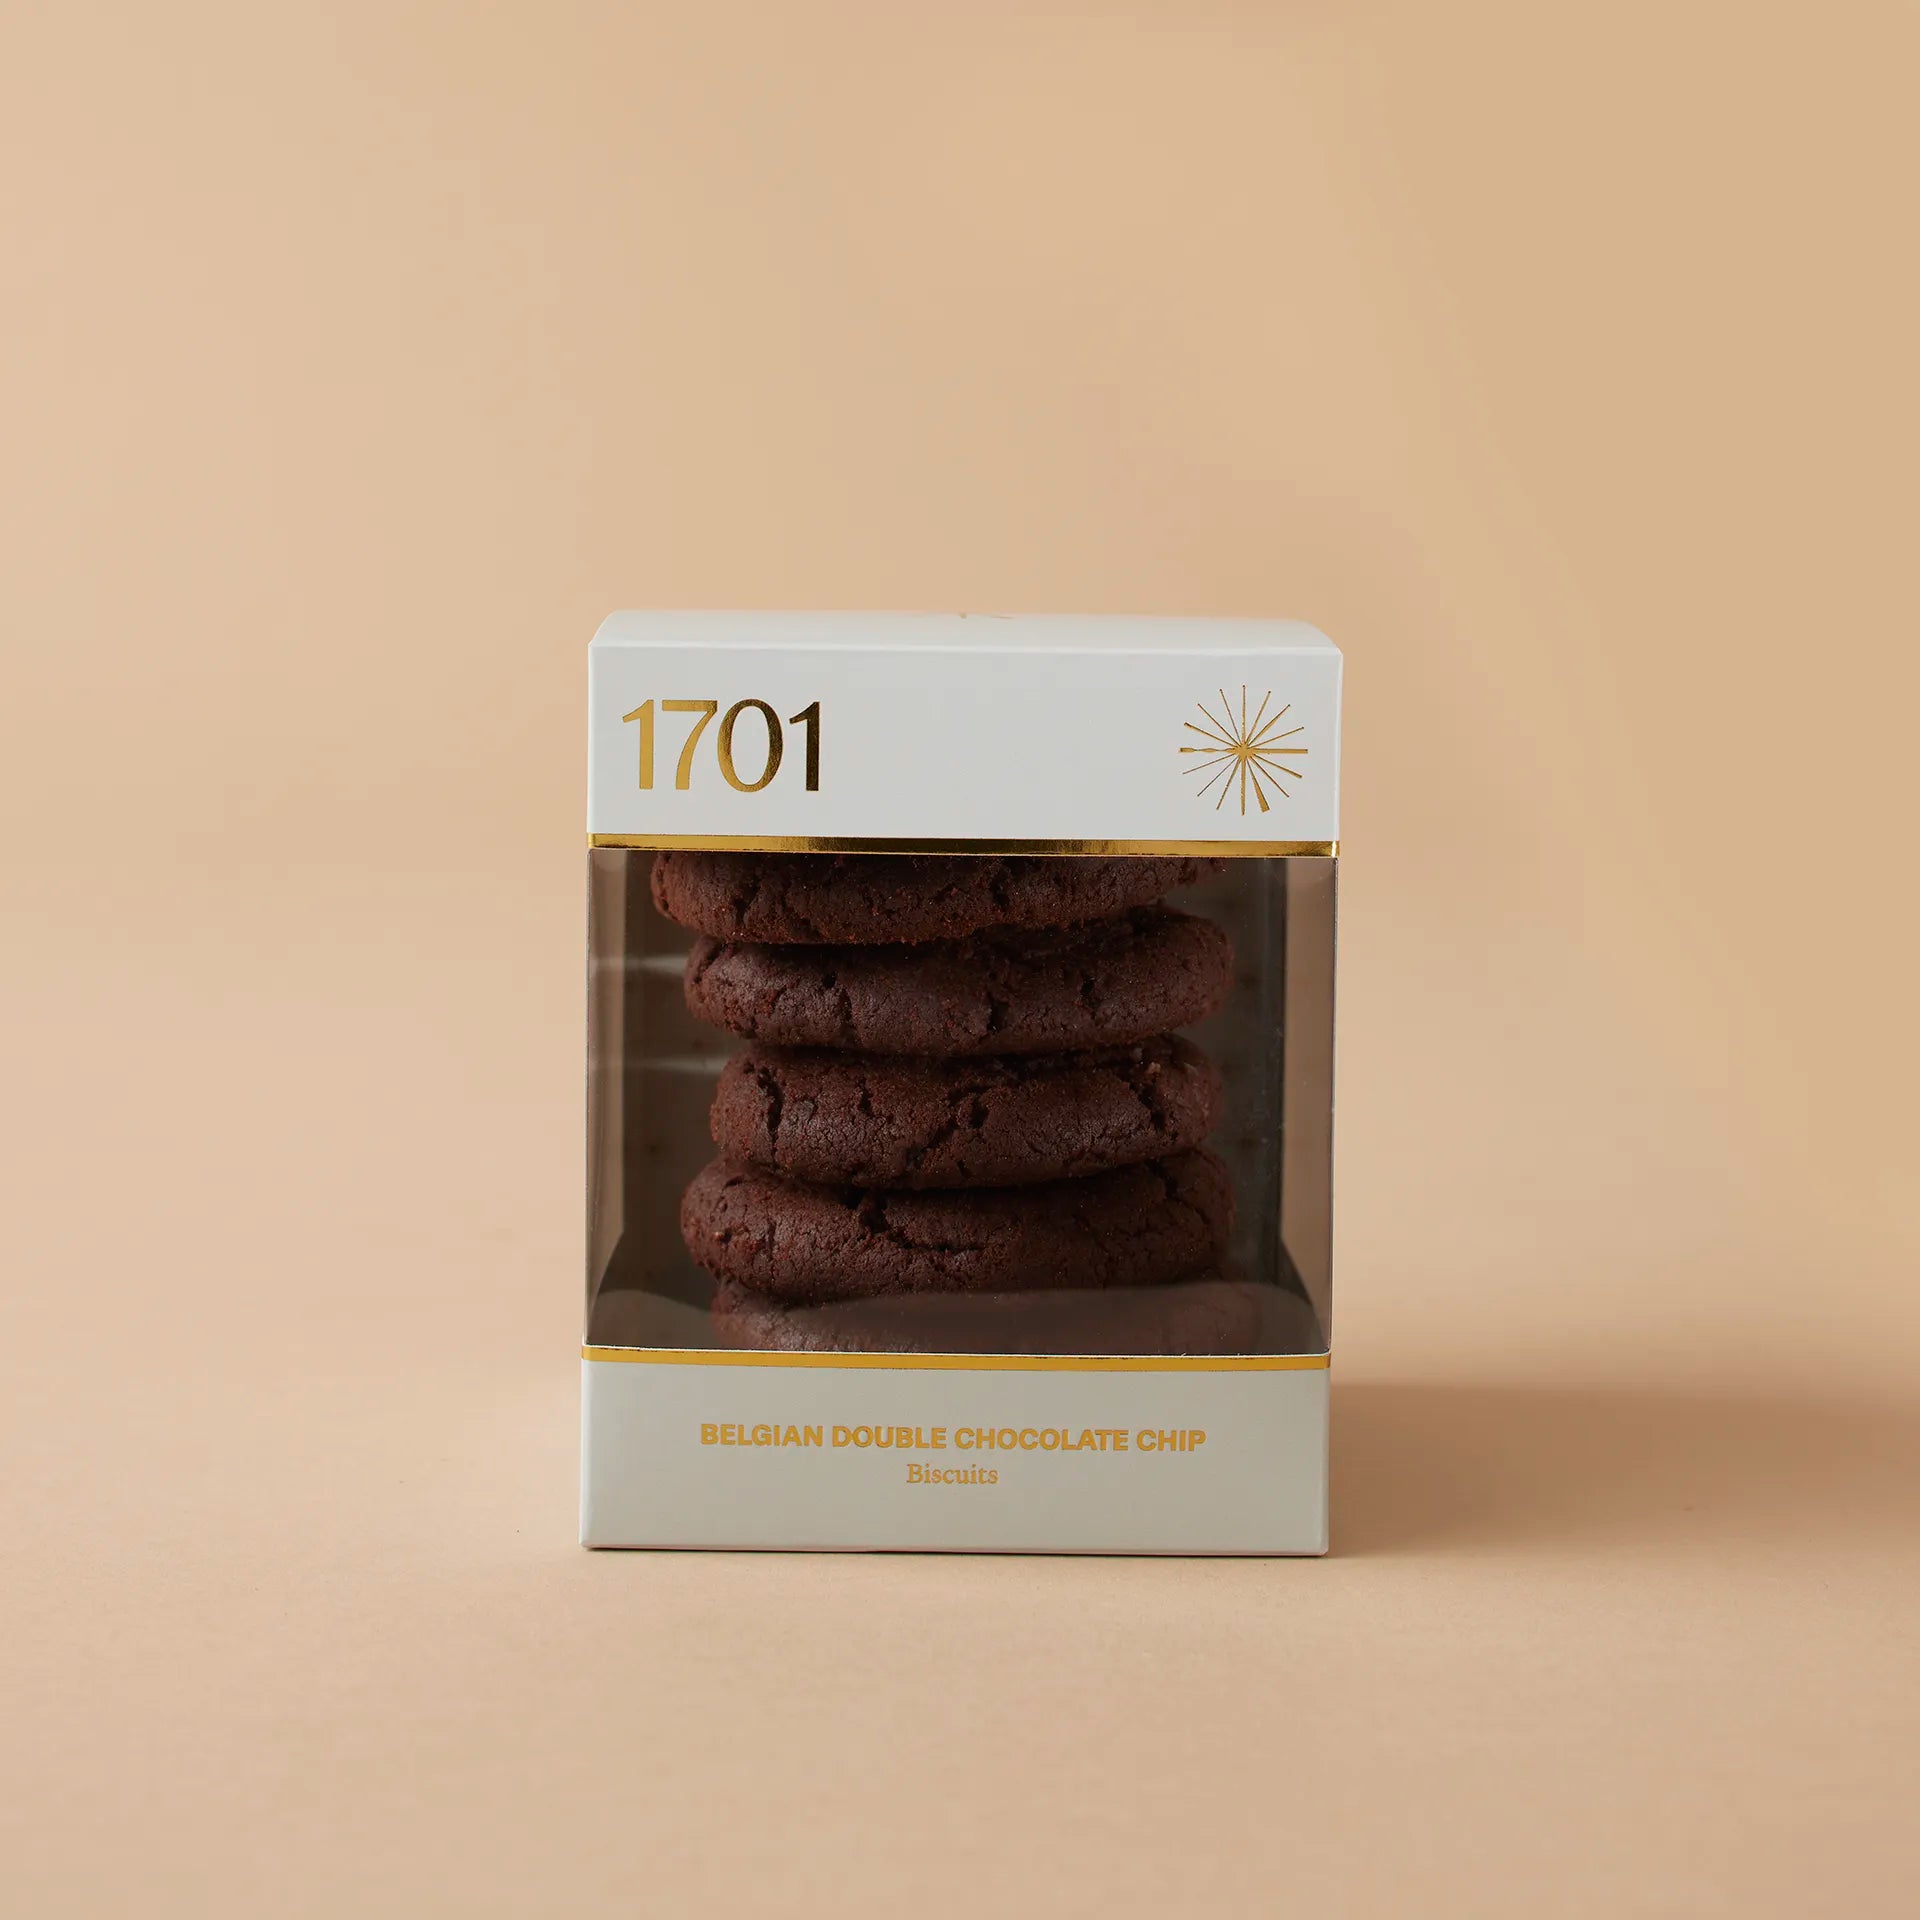 "Belgian Double Chocolate Chip Biscuits" gift box featuring a 200g box of handmade biscuits with double Belgian chocolate chips. The biscuits are presented in a product box on a warm background, with the product label visible on the front of the box. The biscuits are SANHA Halaal approved, making them a perfect gift idea for anyone who appreciates high-quality biscuits made with care.